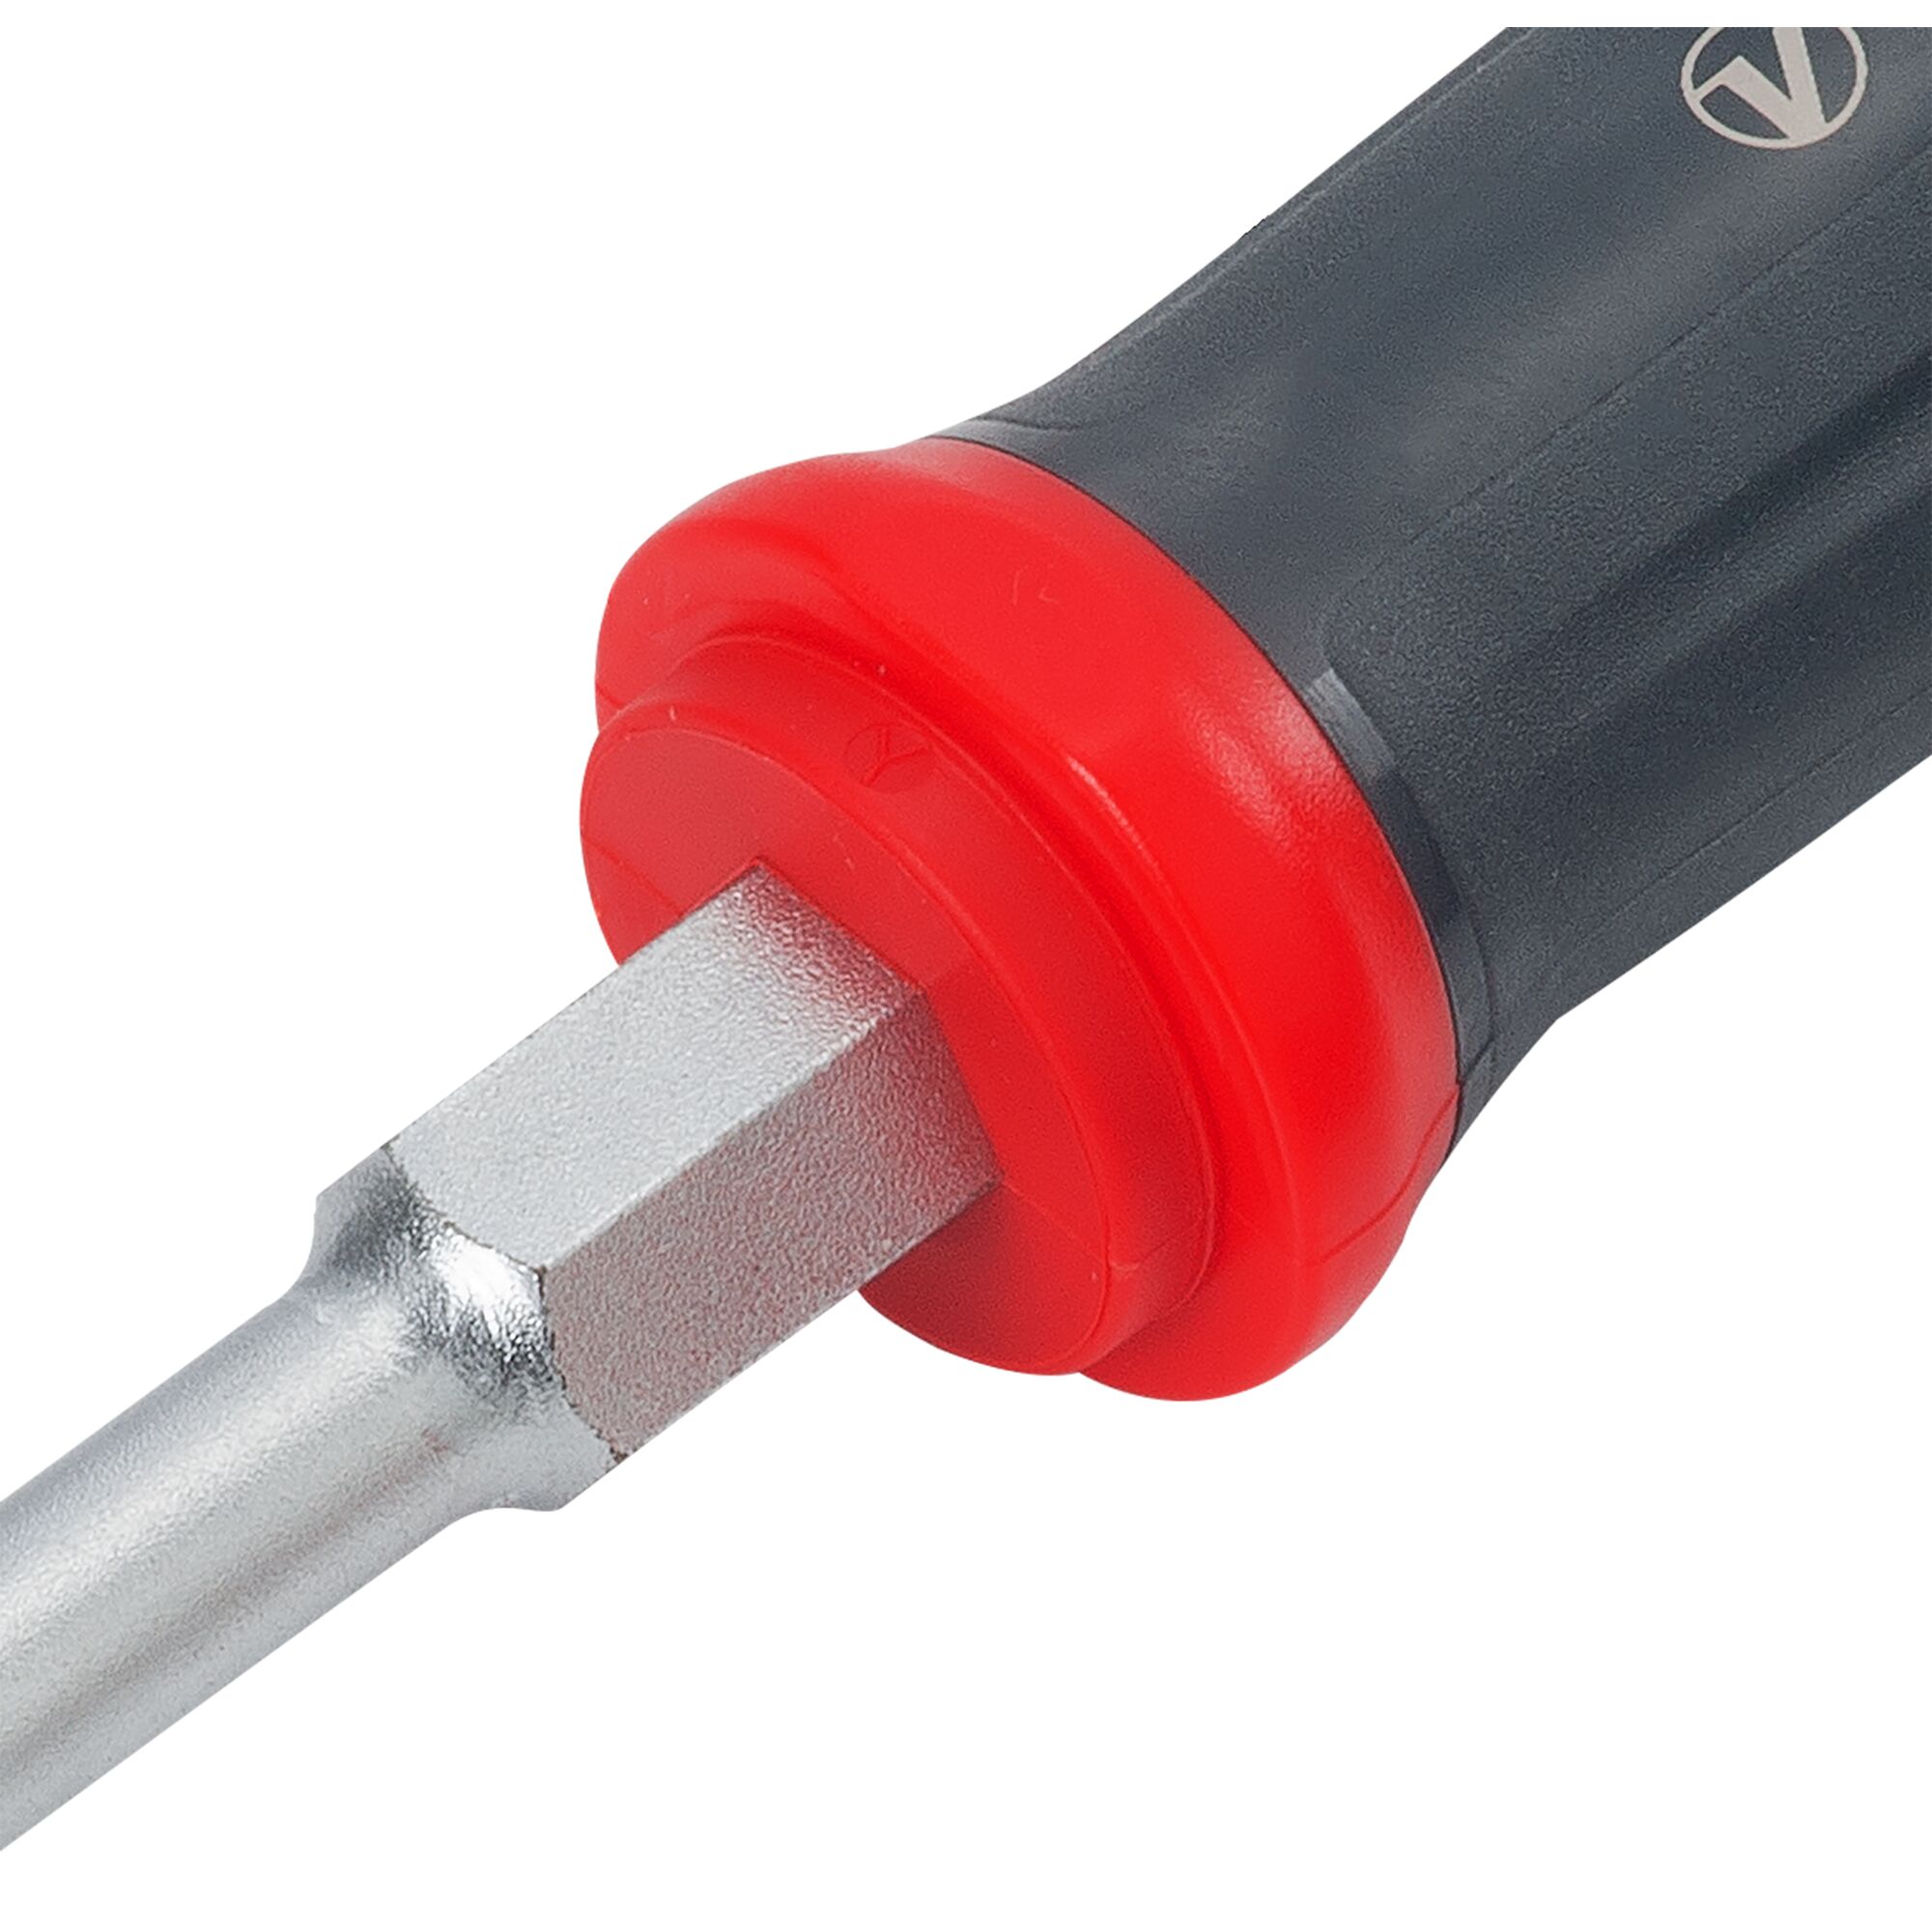 View of CRAFTSMAN Screwdrivers: Set highlighting product features